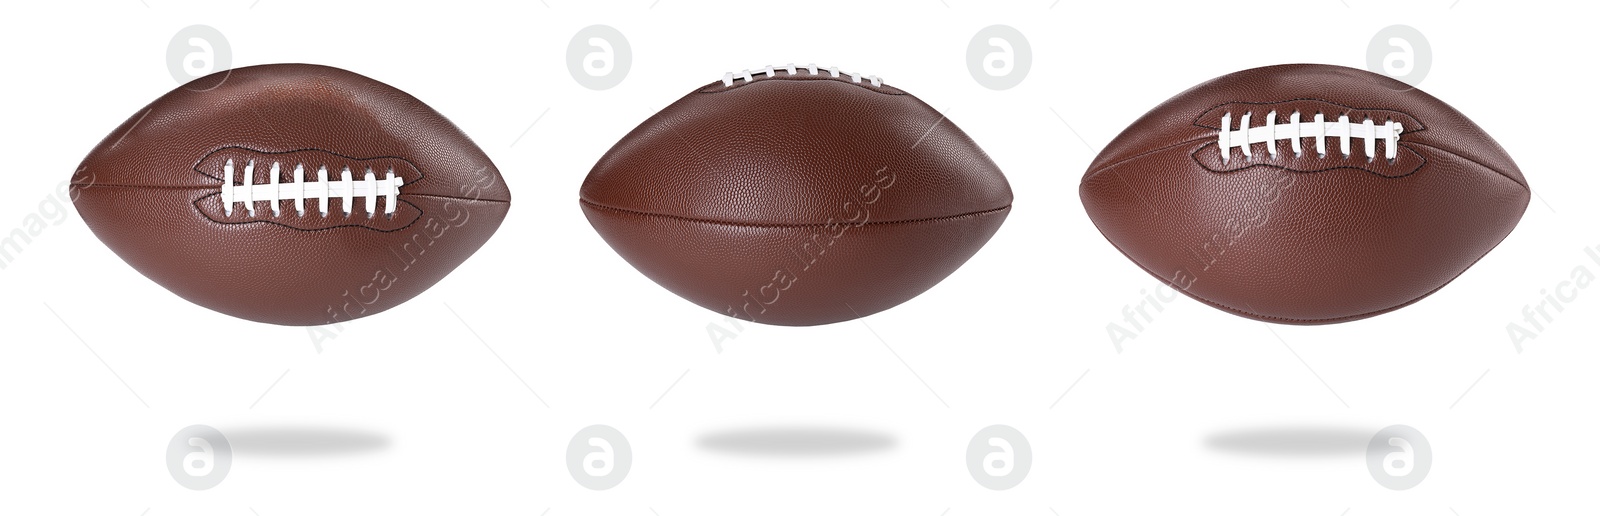 Image of American football ball isolated on white, different sides